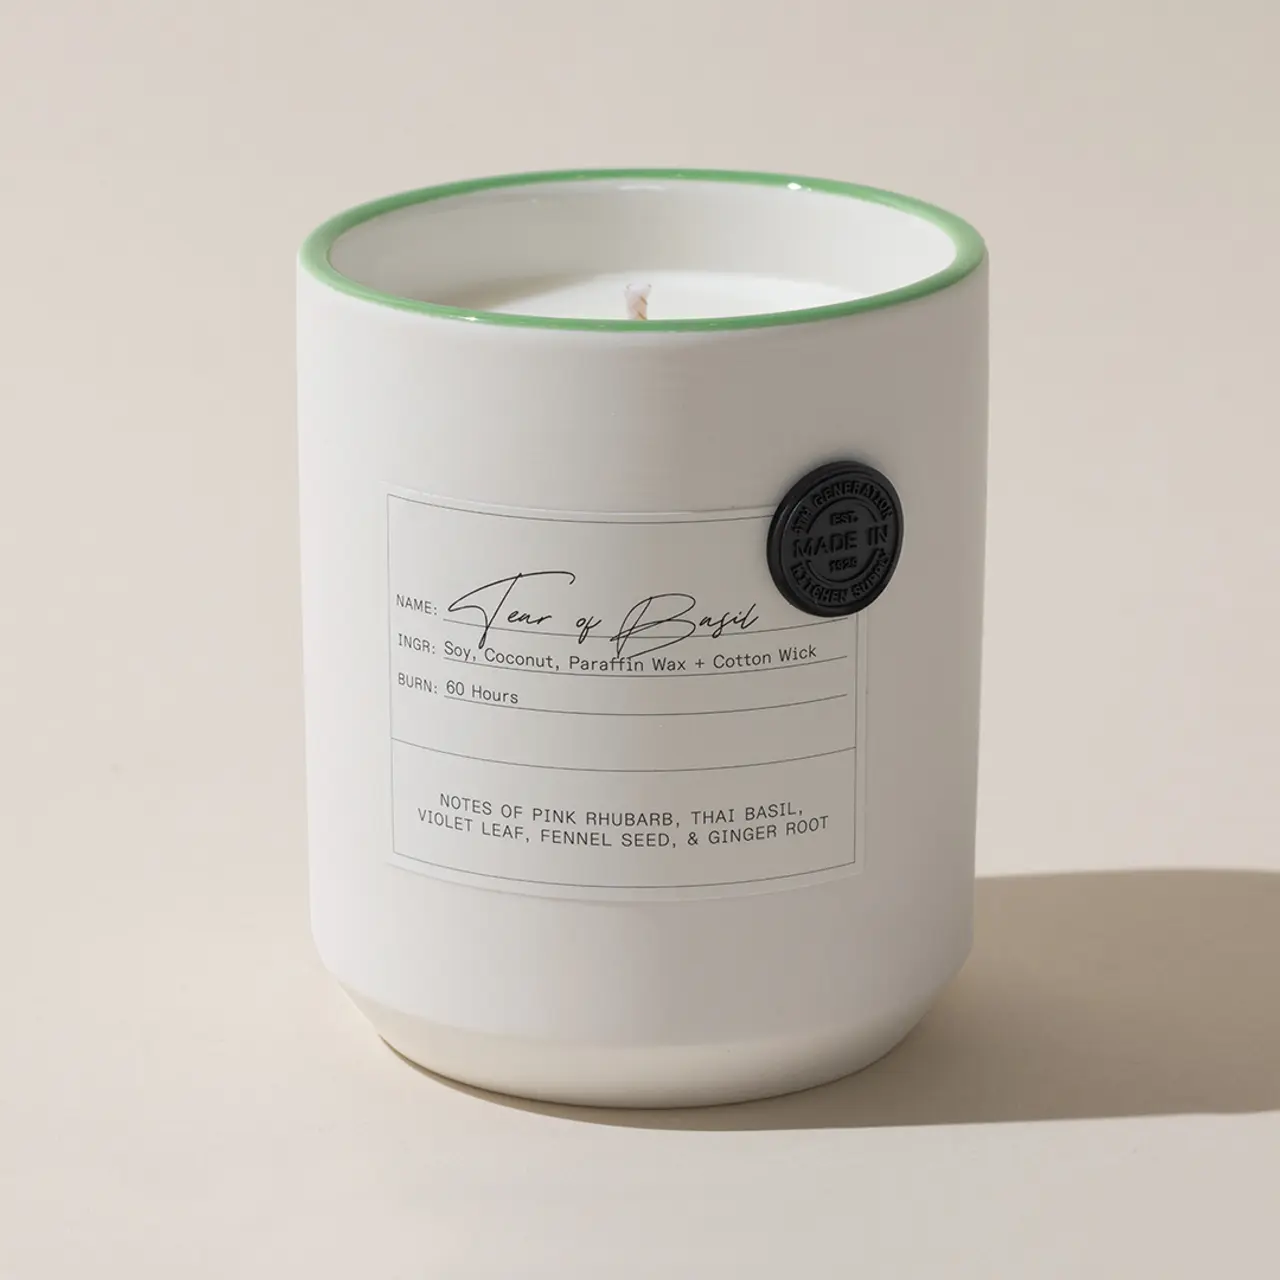 A scented candle with a description label and a green rim sits against a neutral background.